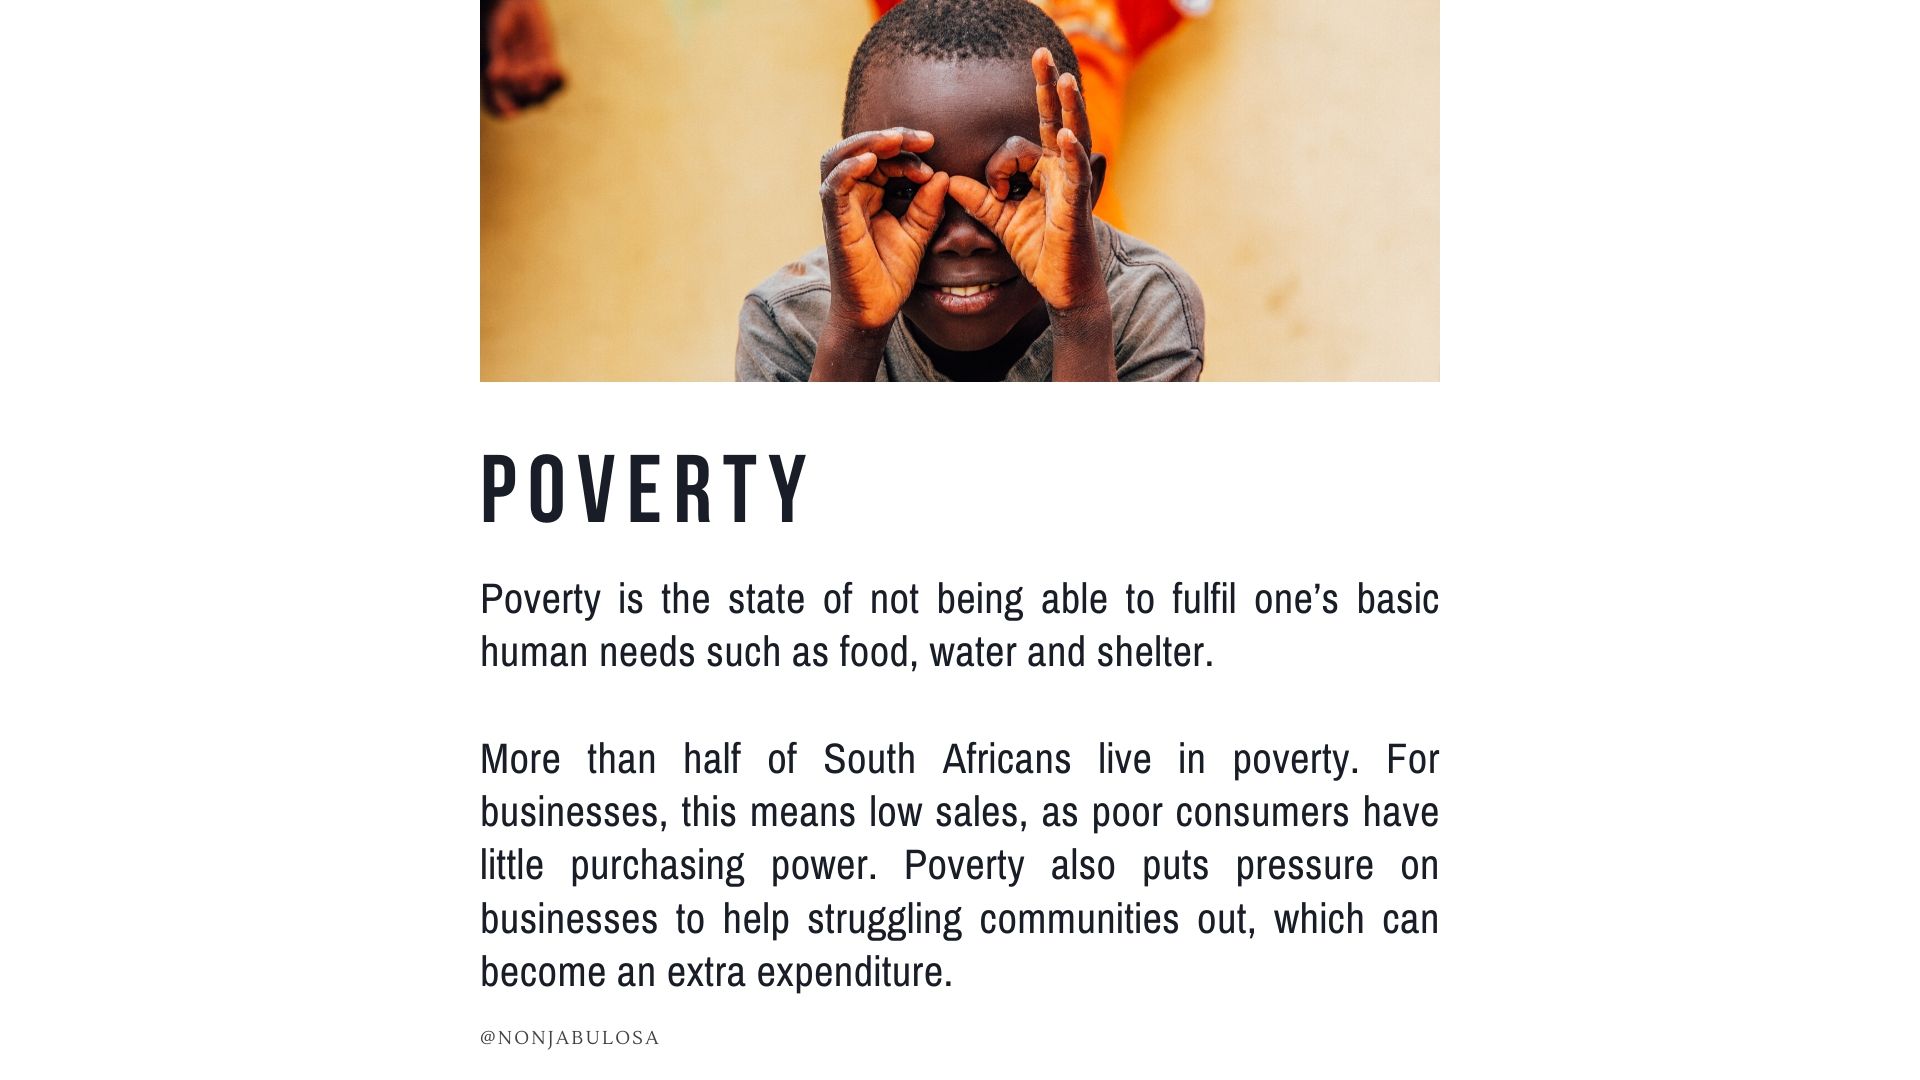 List of South African Contemporary Socio-Economic Issues - Definition and explanation of poverty